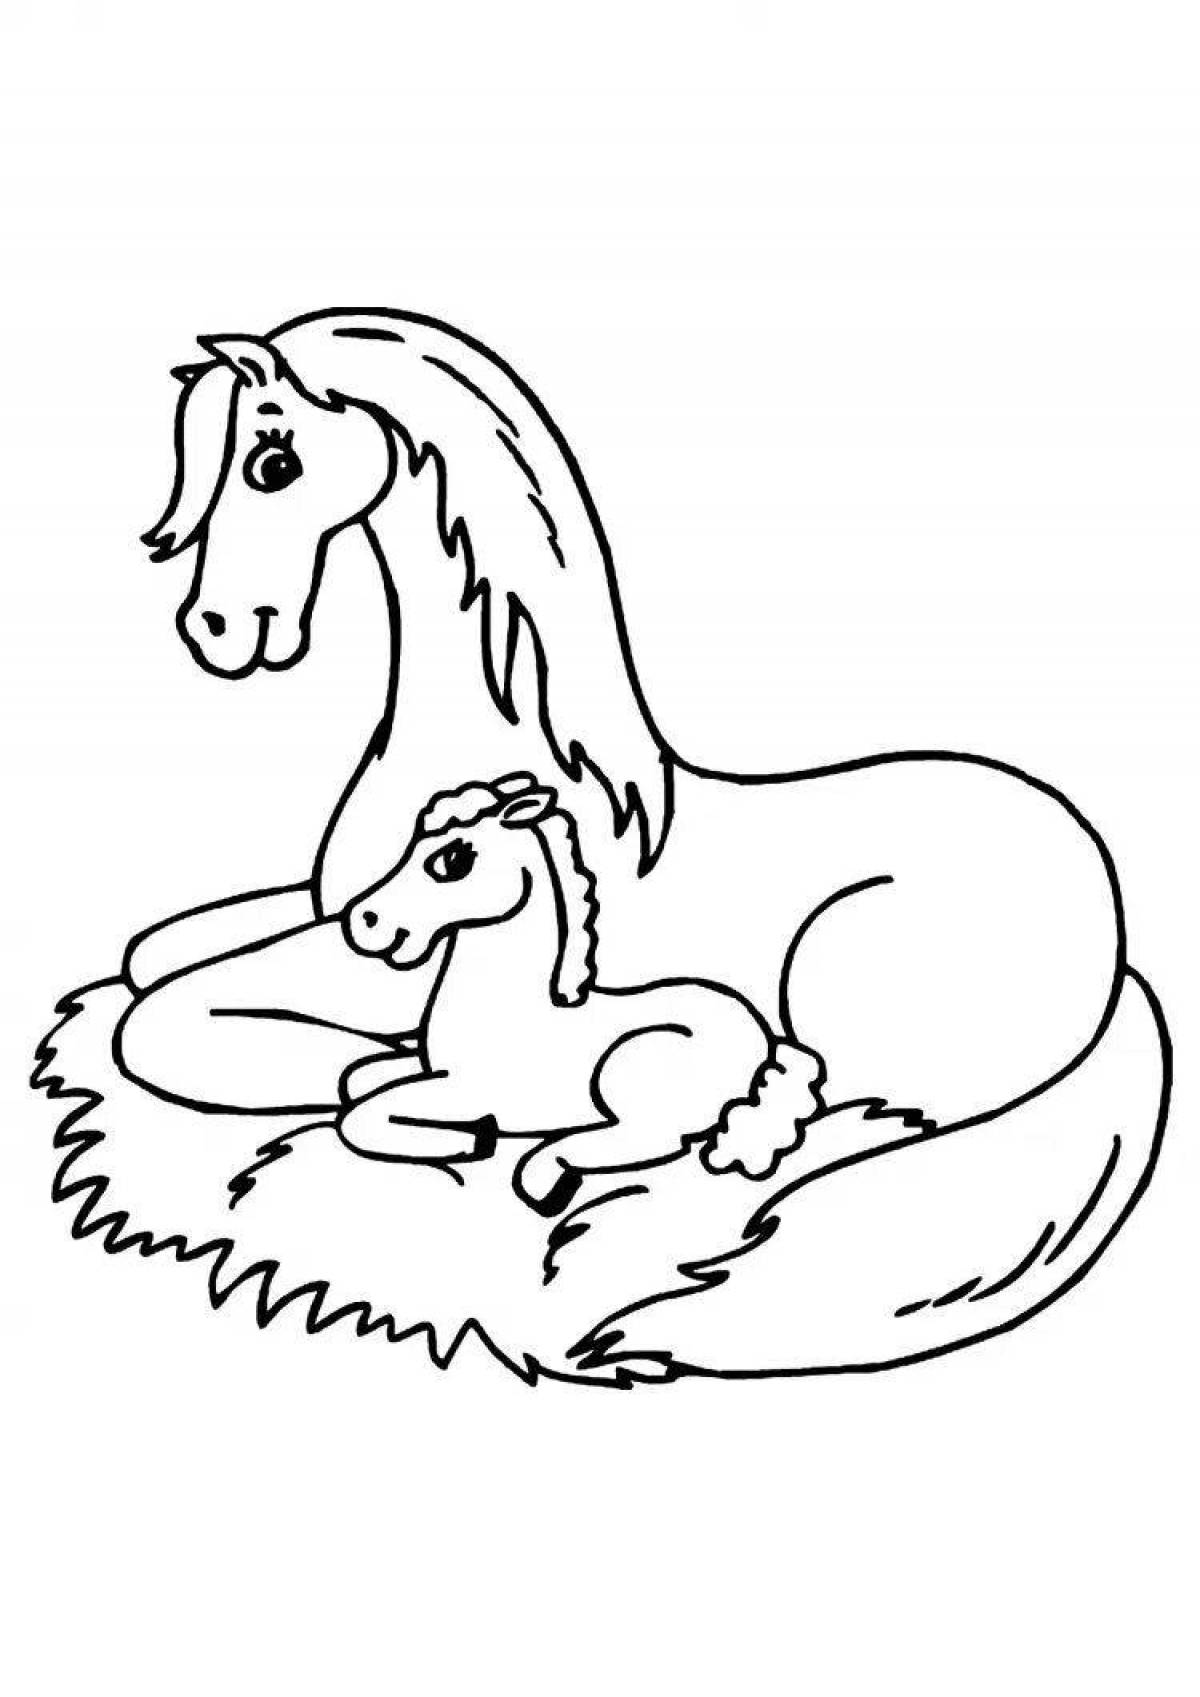 Great horse family coloring book